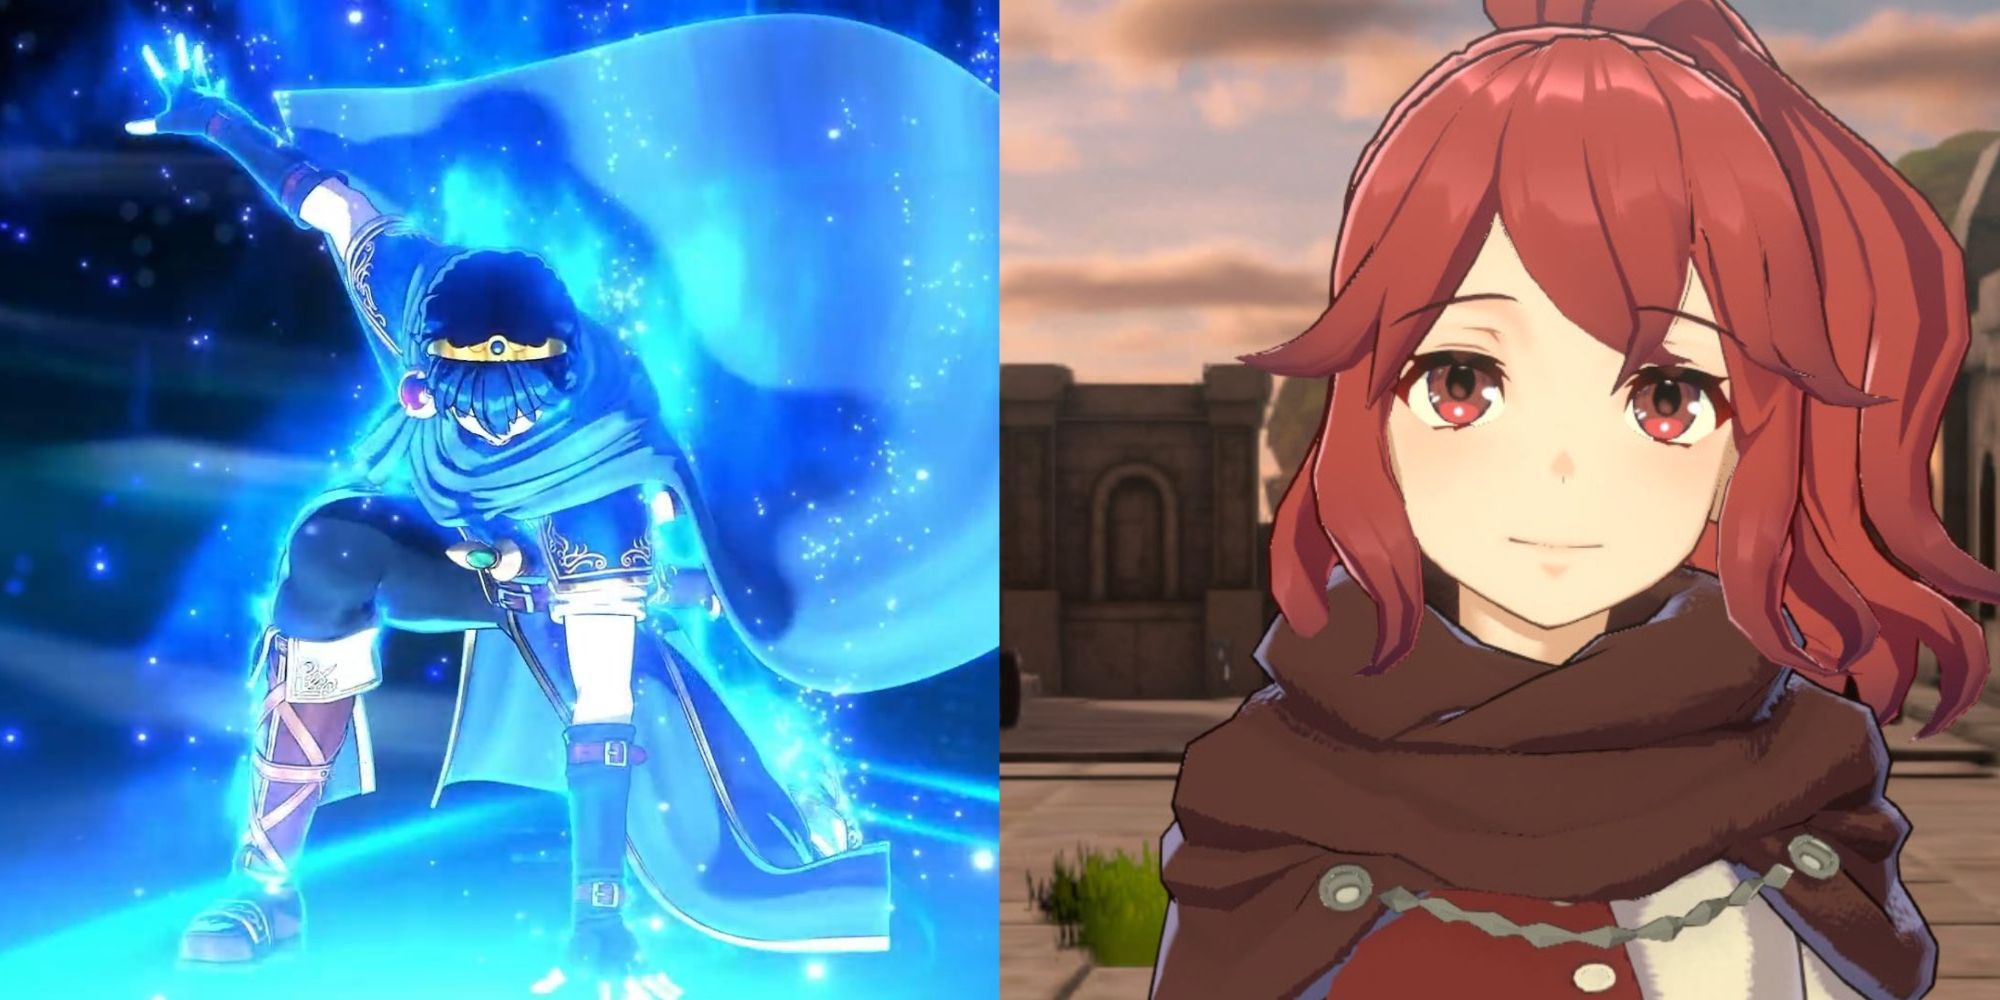 Fire Emblem Engage main image with Marth and Anna